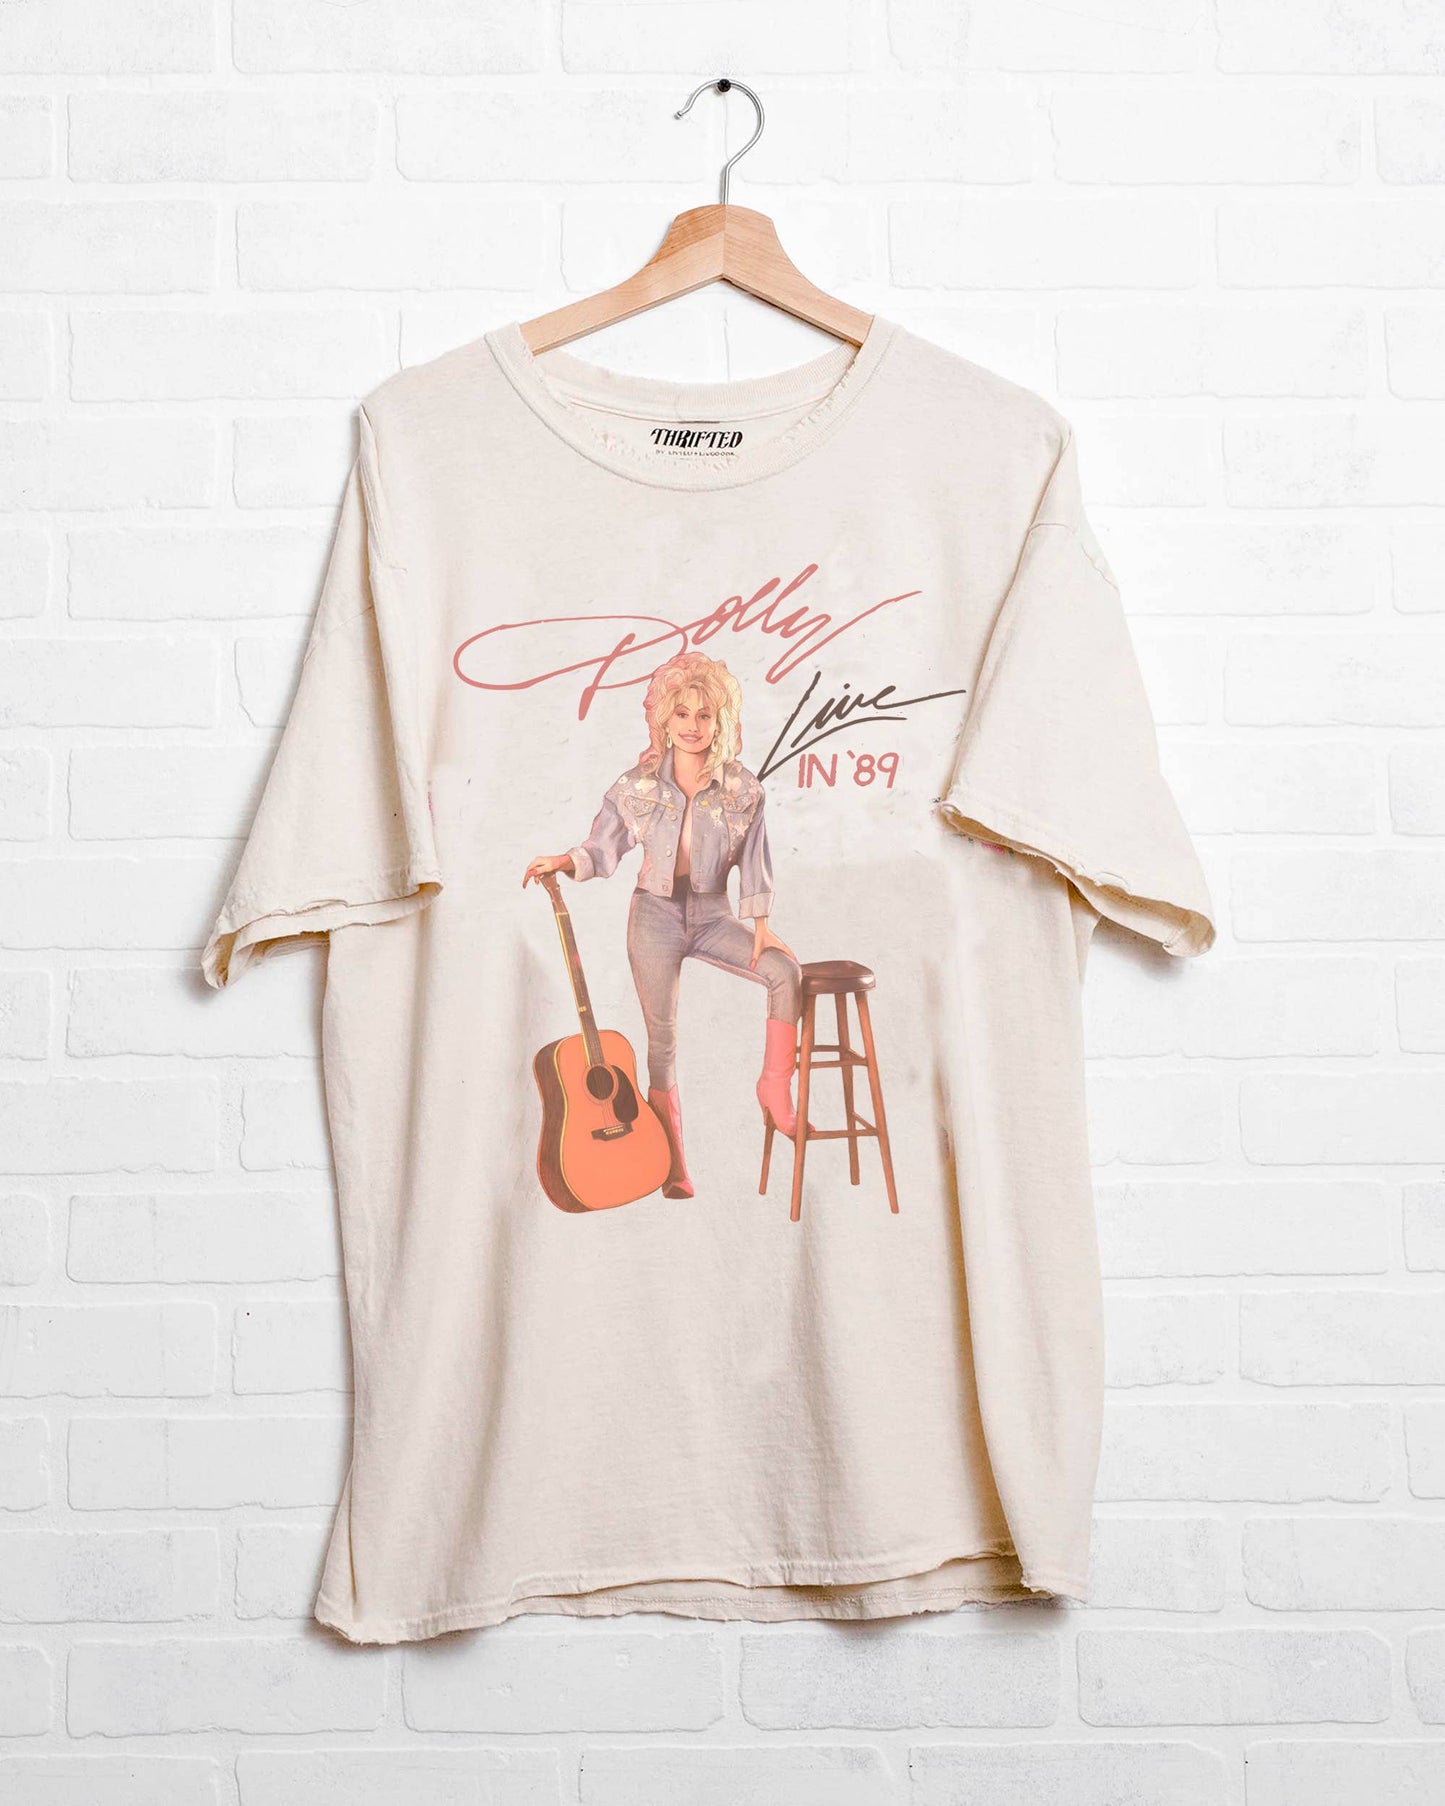 Dolly Parton Live in '89 Graphic Tee